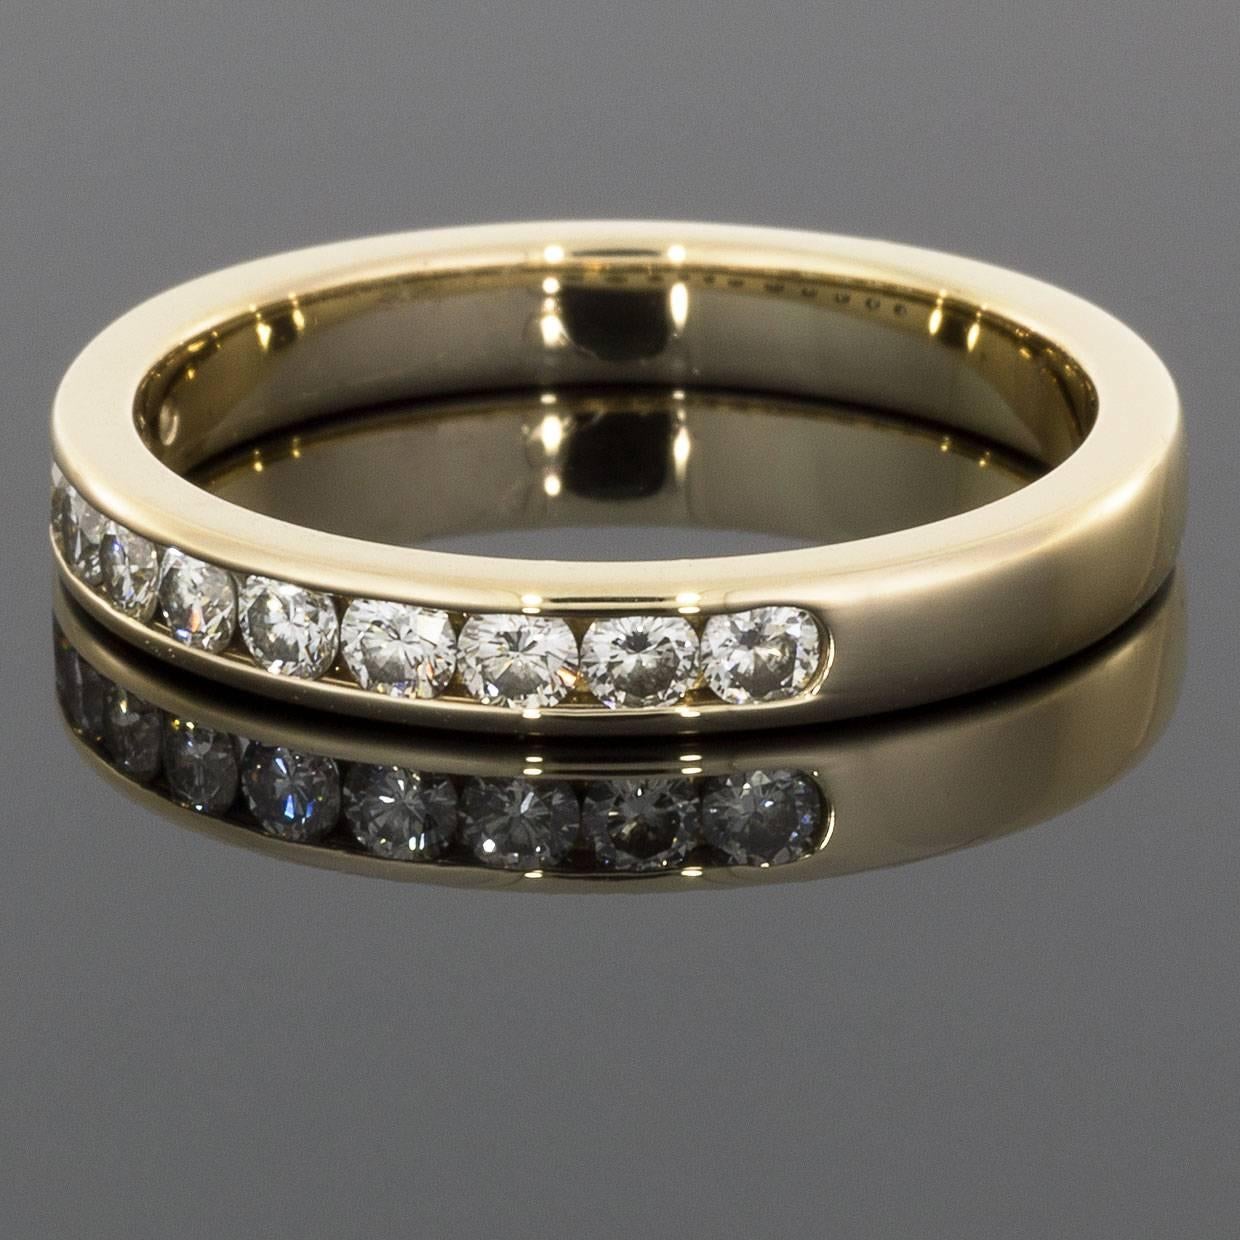 This classic band is a beautiful 14 karat yellow gold diamond band that can dress up any ring, stand alone, or stack with others. The ring features 11 round brilliant cut diamonds that have a combined total weight of .33 carats & grade as GH/SI1 in